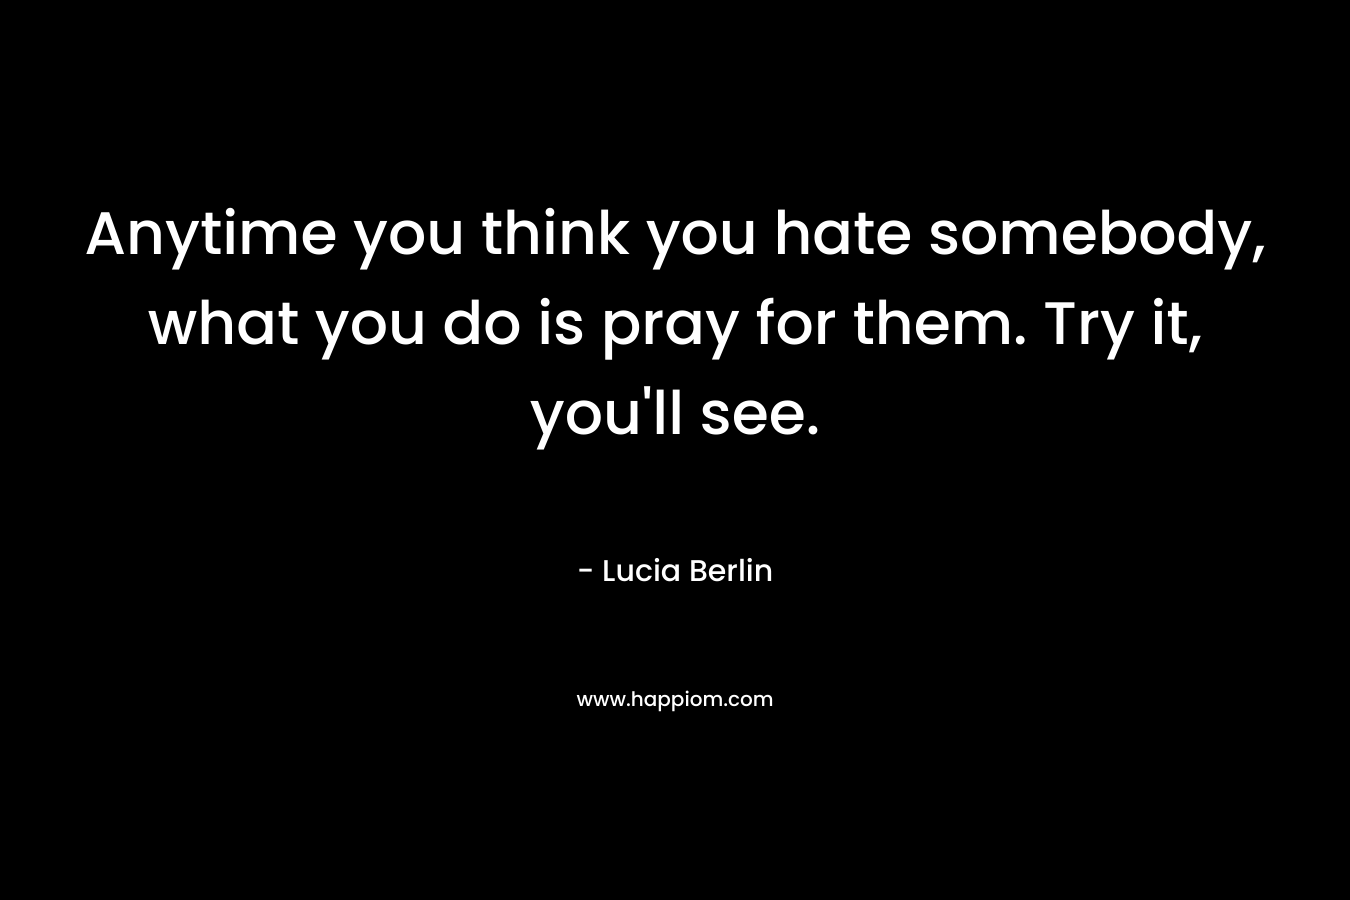 Anytime you think you hate somebody, what you do is pray for them. Try it, you'll see.